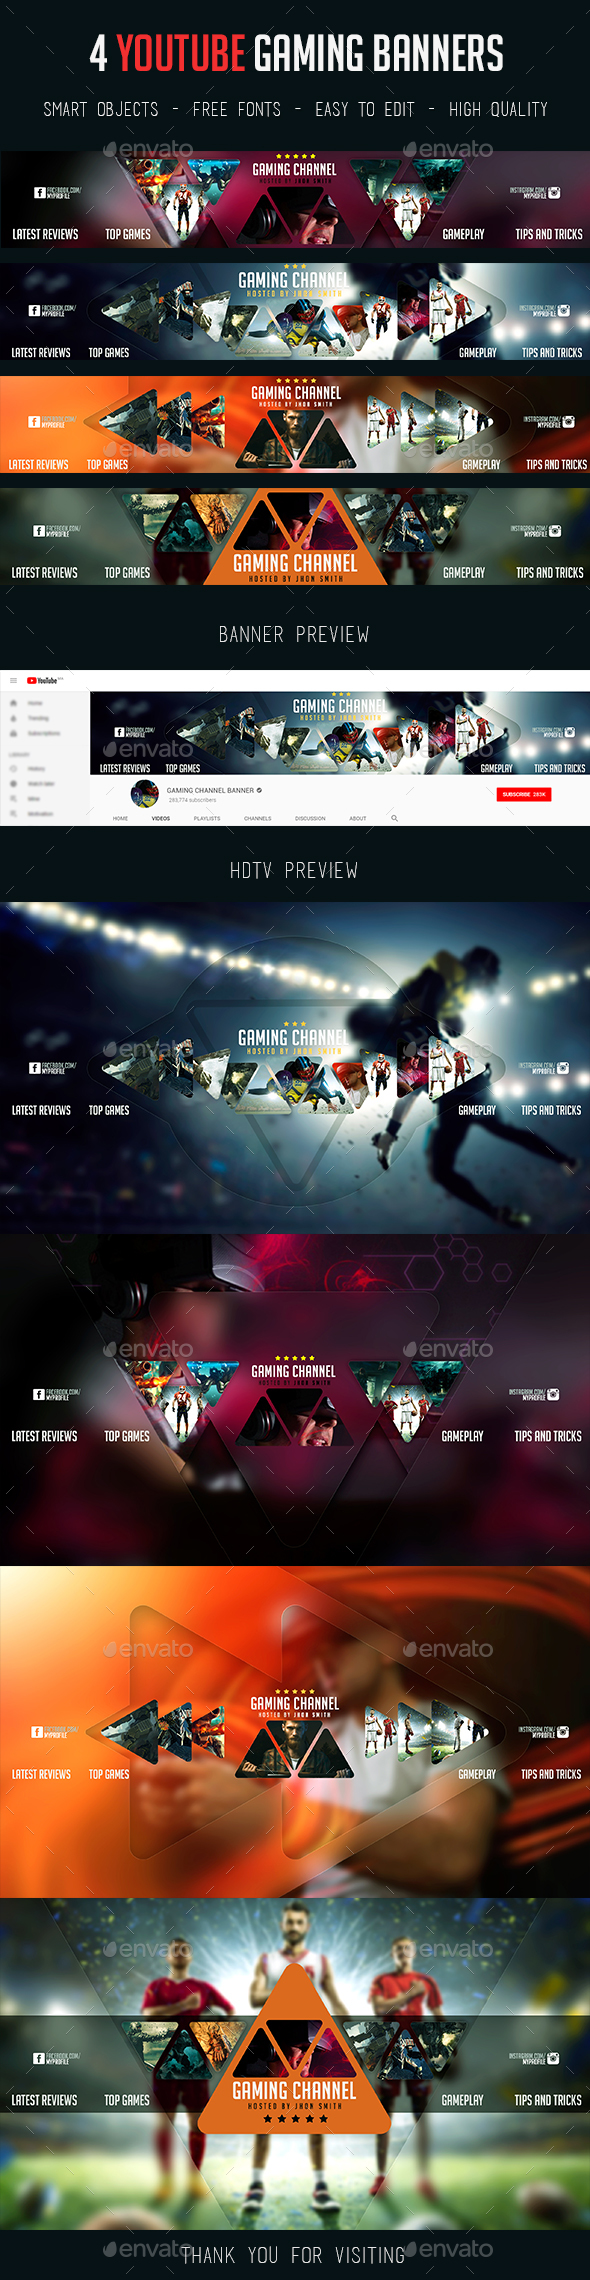 4 Youtube Gaming Banners By Blildesign Graphicriver